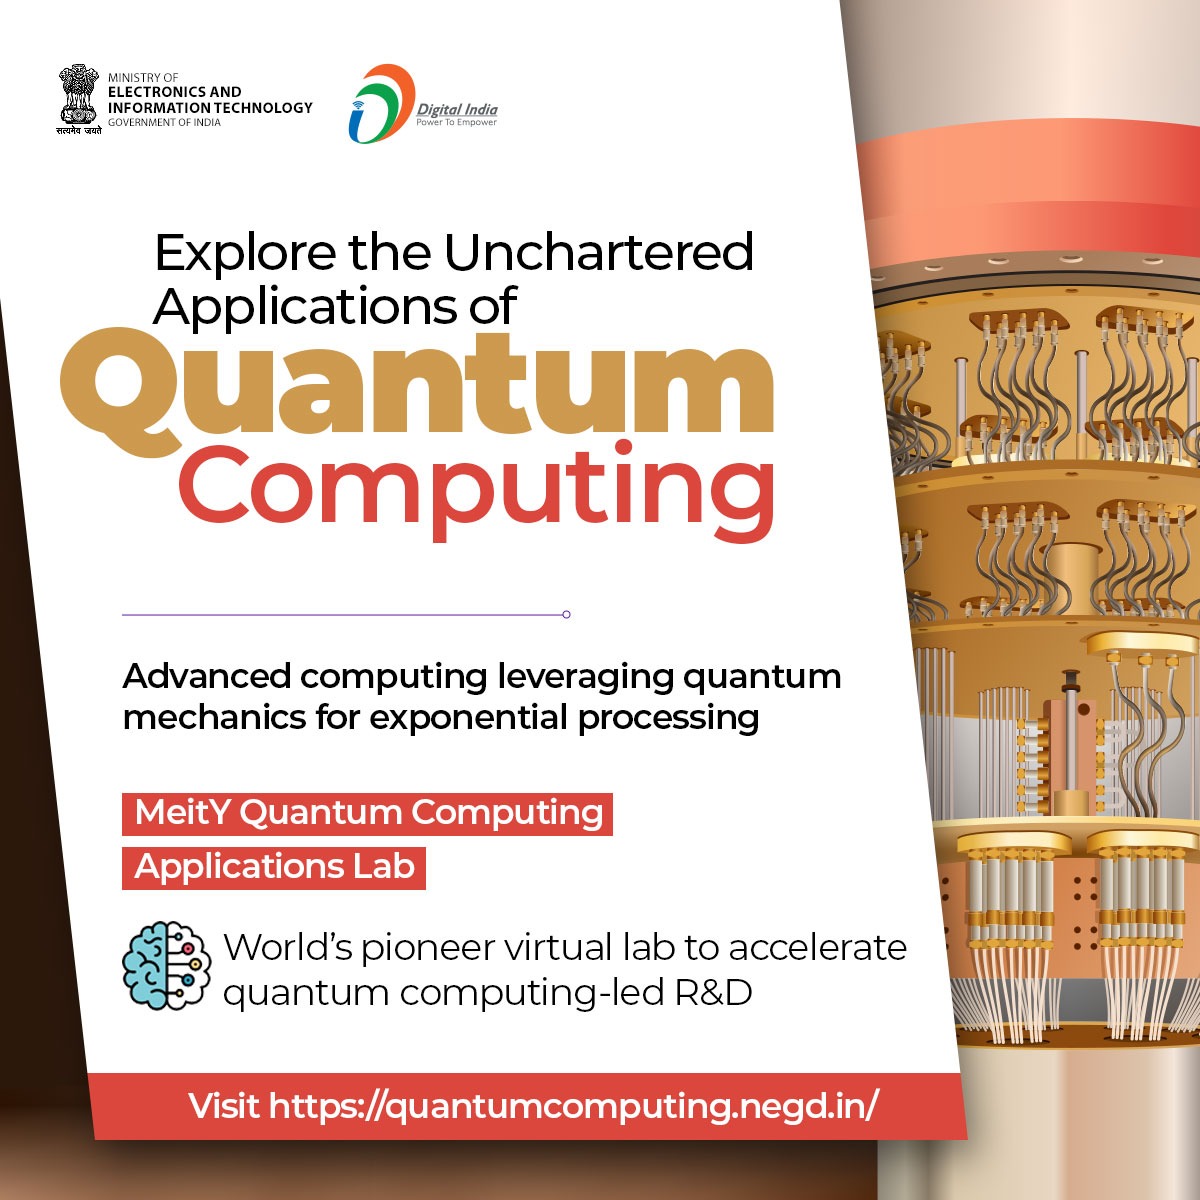 The MeitY Quantum Computing Applications Lab (QCAL) is the world’s pioneer virtual lab to accelerate quantum computing-led R&D and enable new scientific discoveries. Visit quantumcomputing.negd.in #DigitalIndia #QuantumComputing @PrinSciAdvGoI